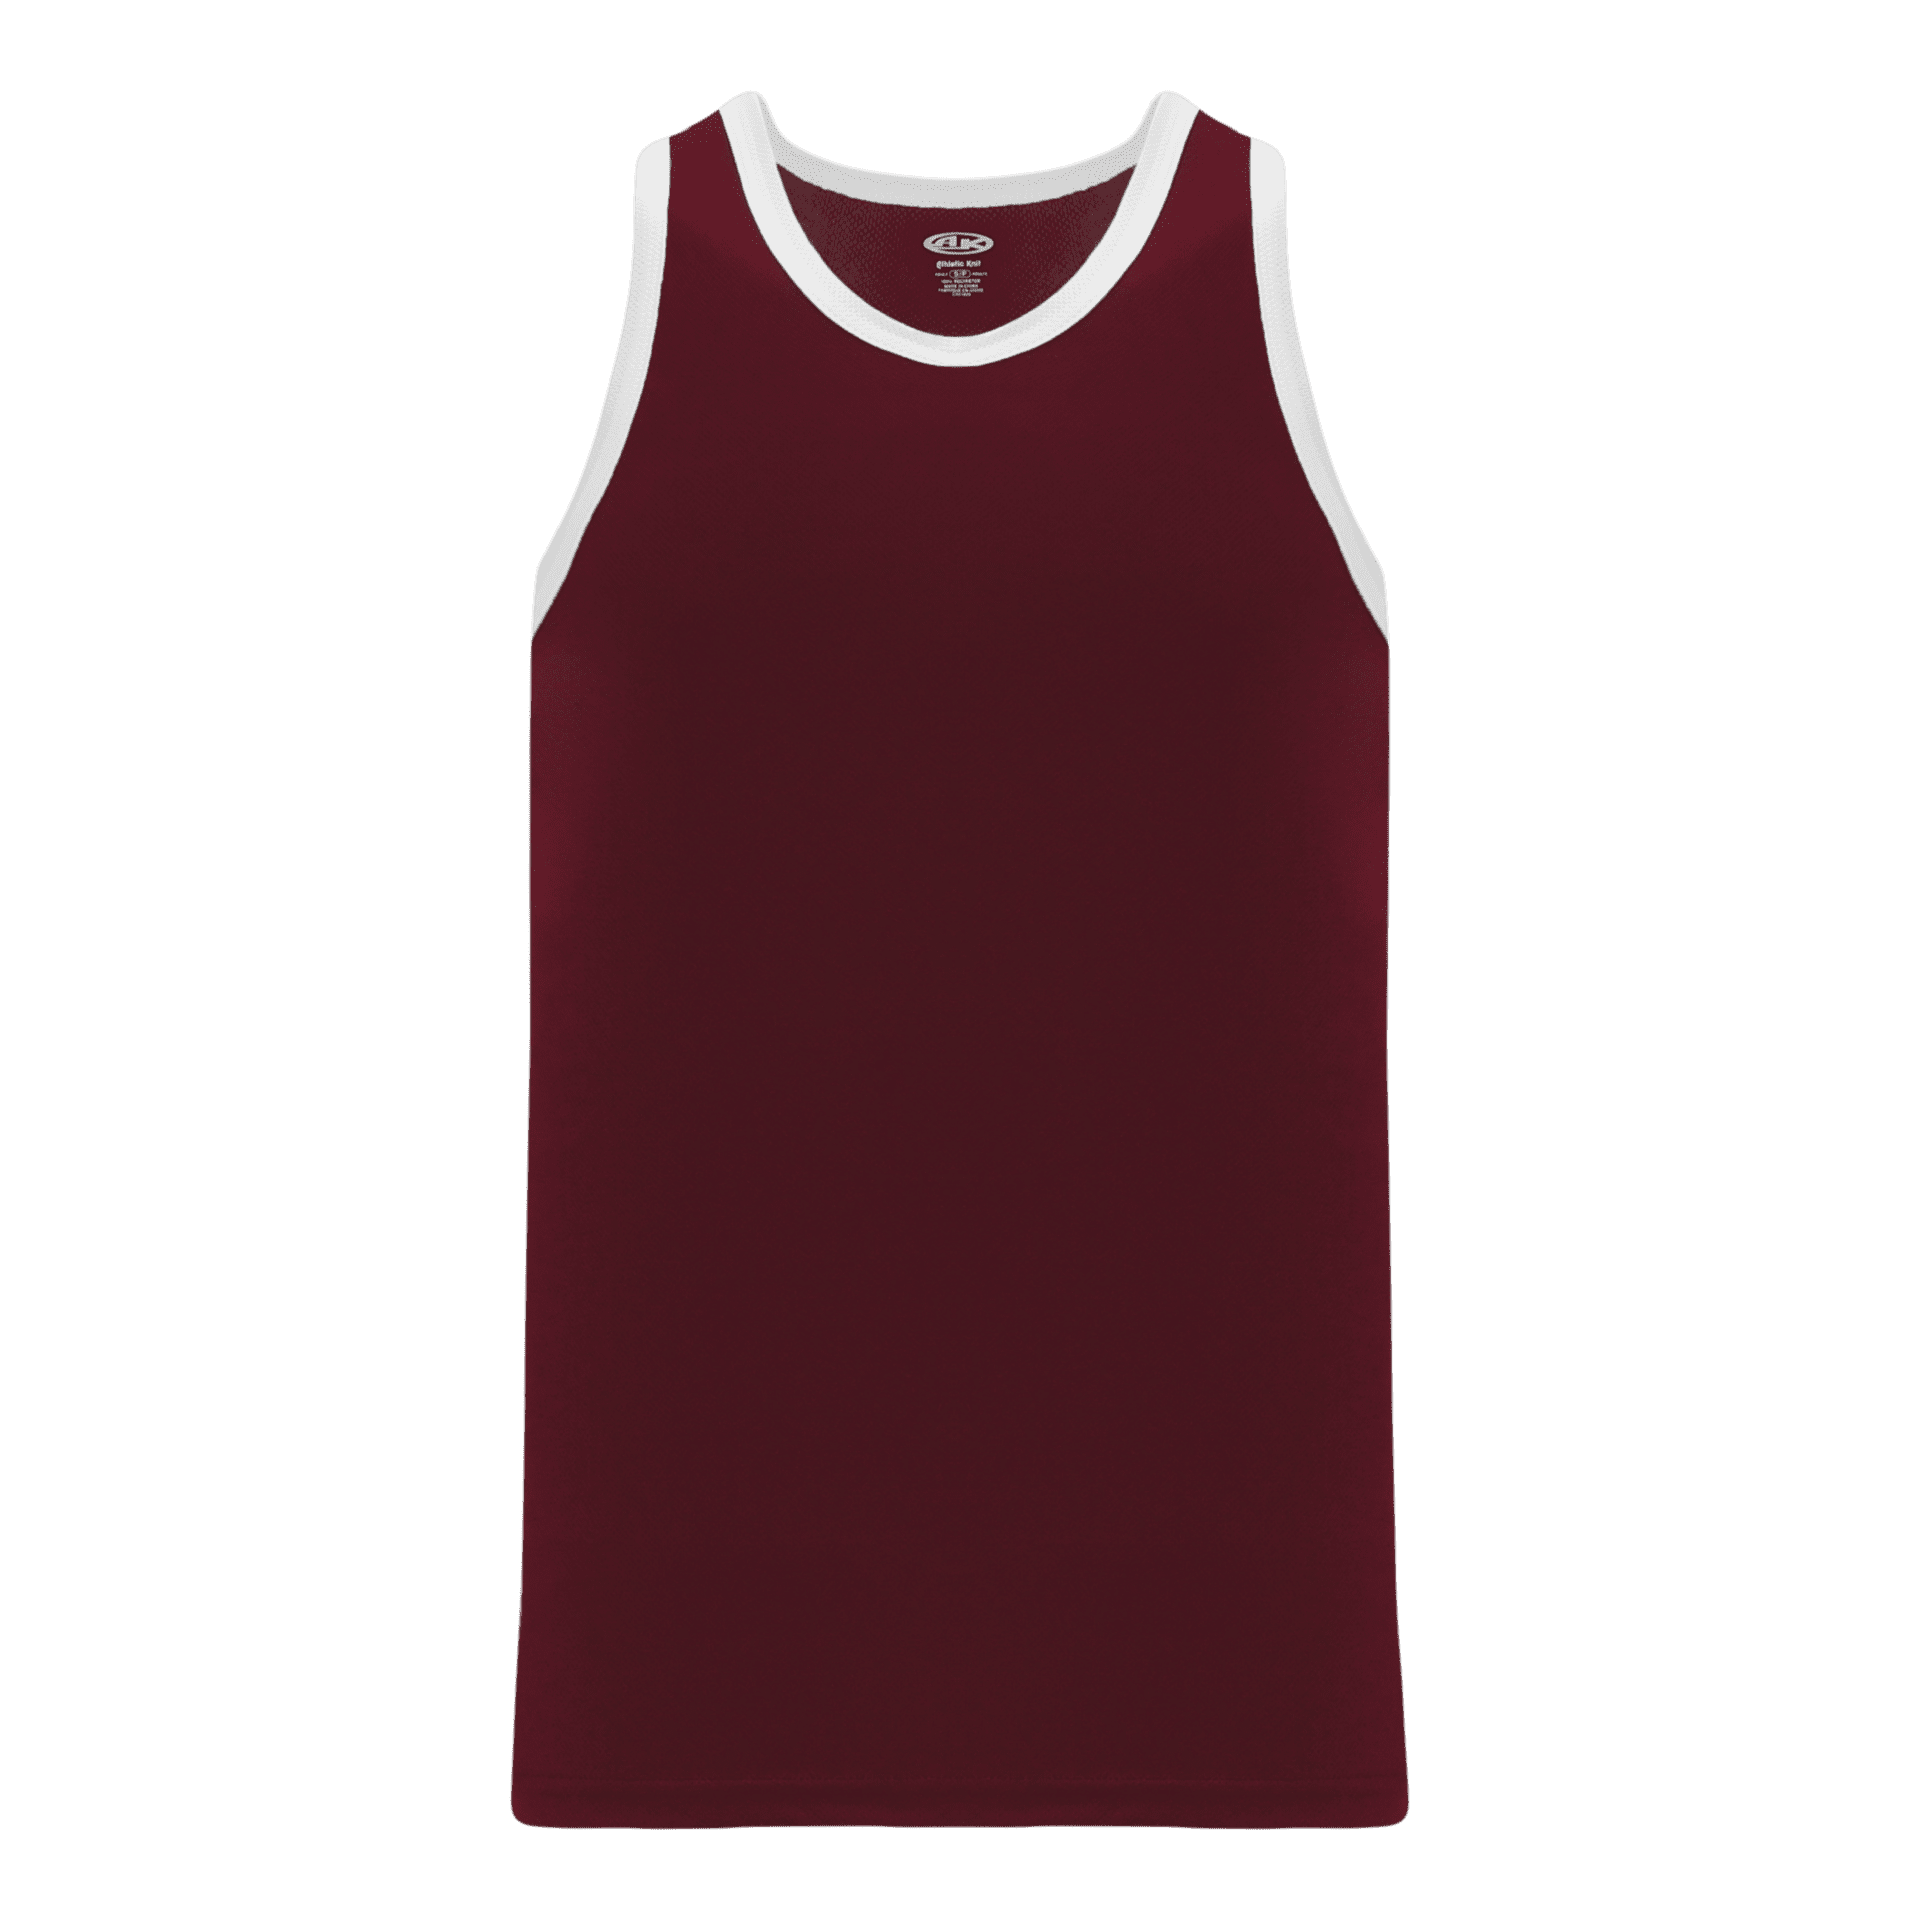 ATHLETIC KNIT LEAGUE BASKETBALL JERSEY #B1325 Maroon / White